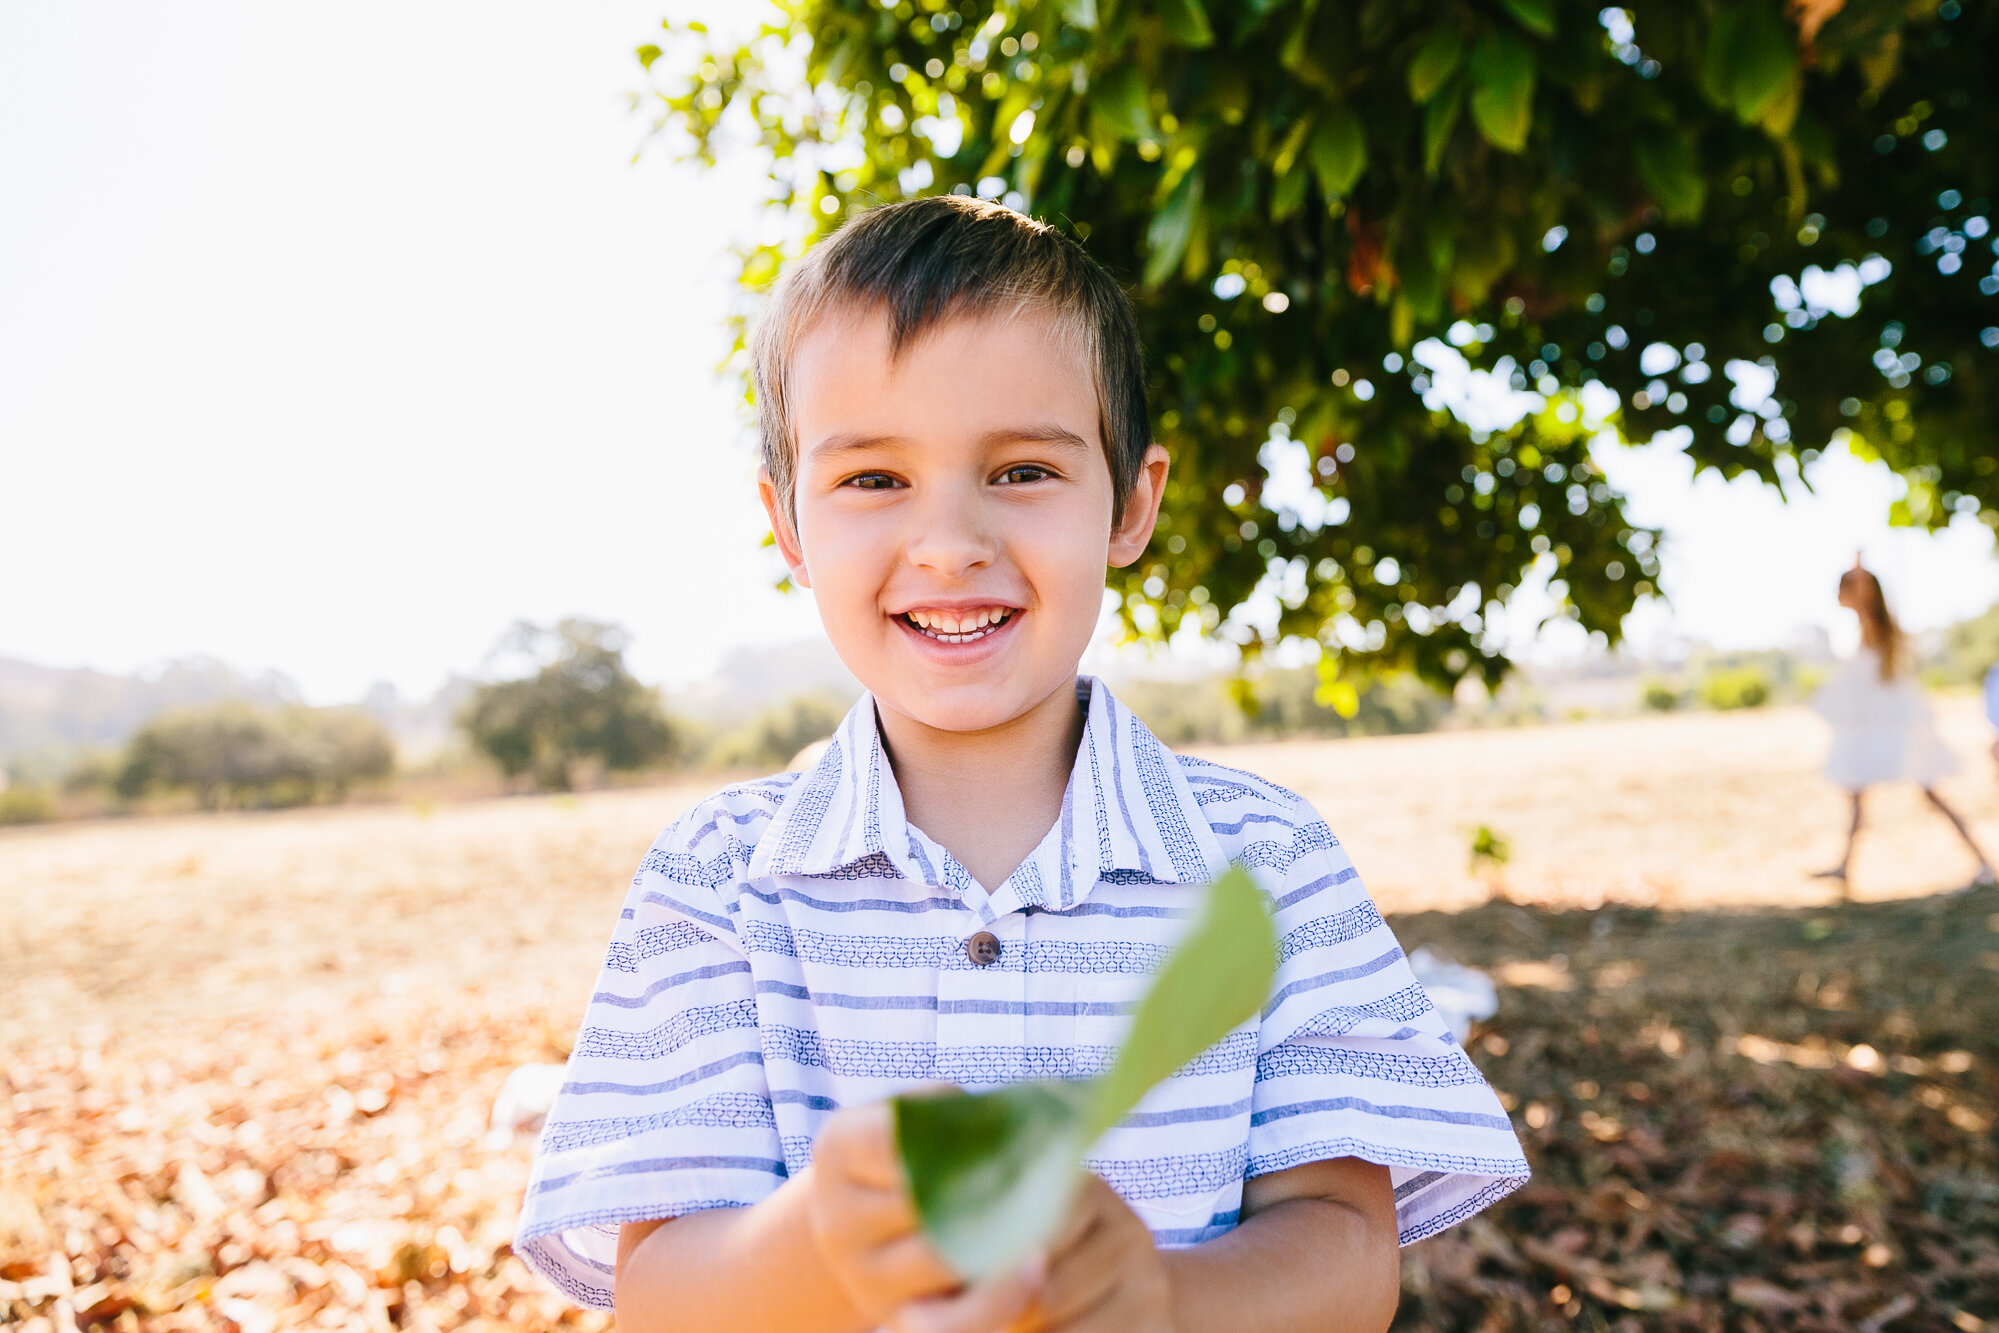 Los_Angeles_Family_Photography_Orange_County_Children_Babies_Field_Farm_Outdoors_Morning_Session_California_Girls_Boys_Kids_Photography-1258.jpg